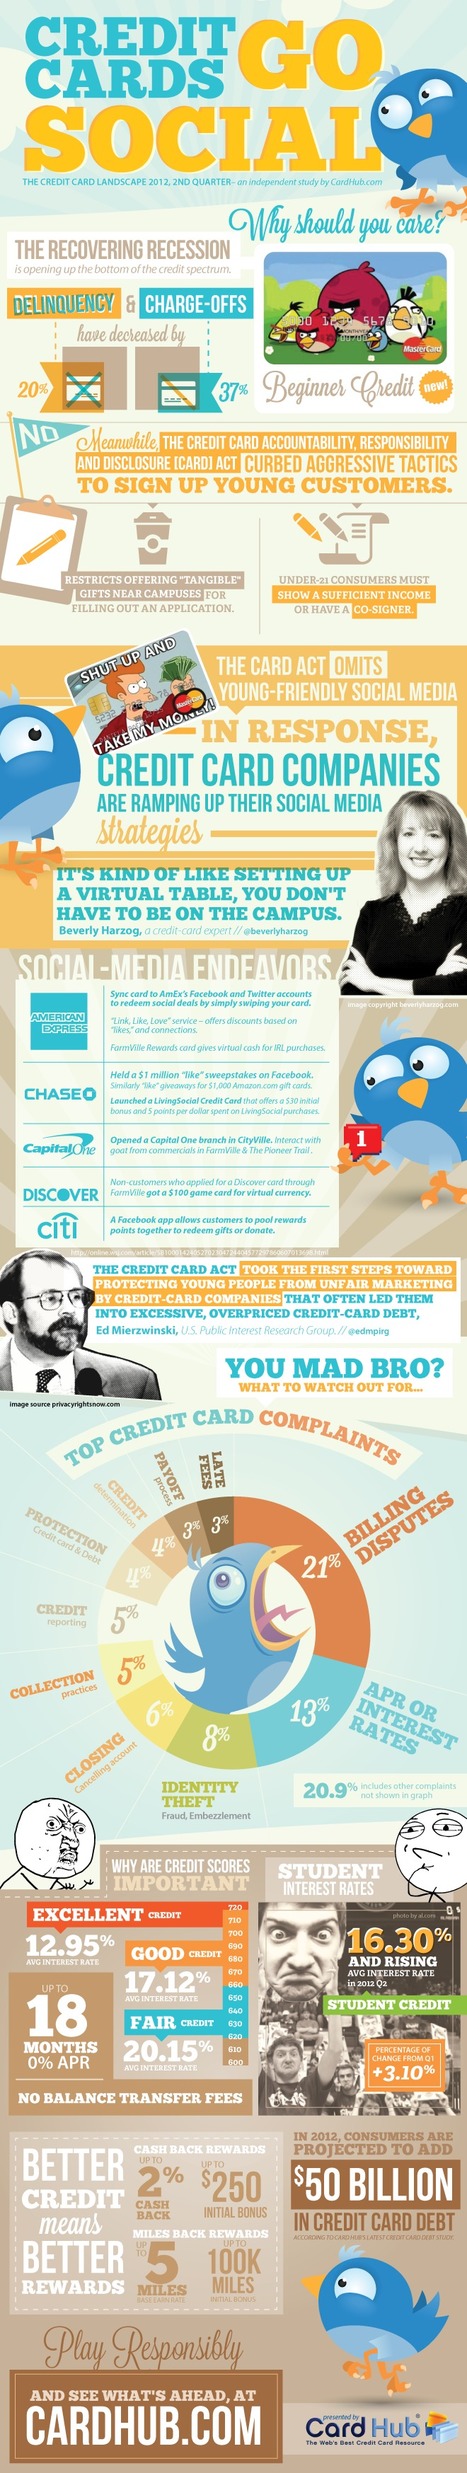 Credit Cards Go Social and Why You Should Care [Infographic] | Business Improvement and Social media | Scoop.it